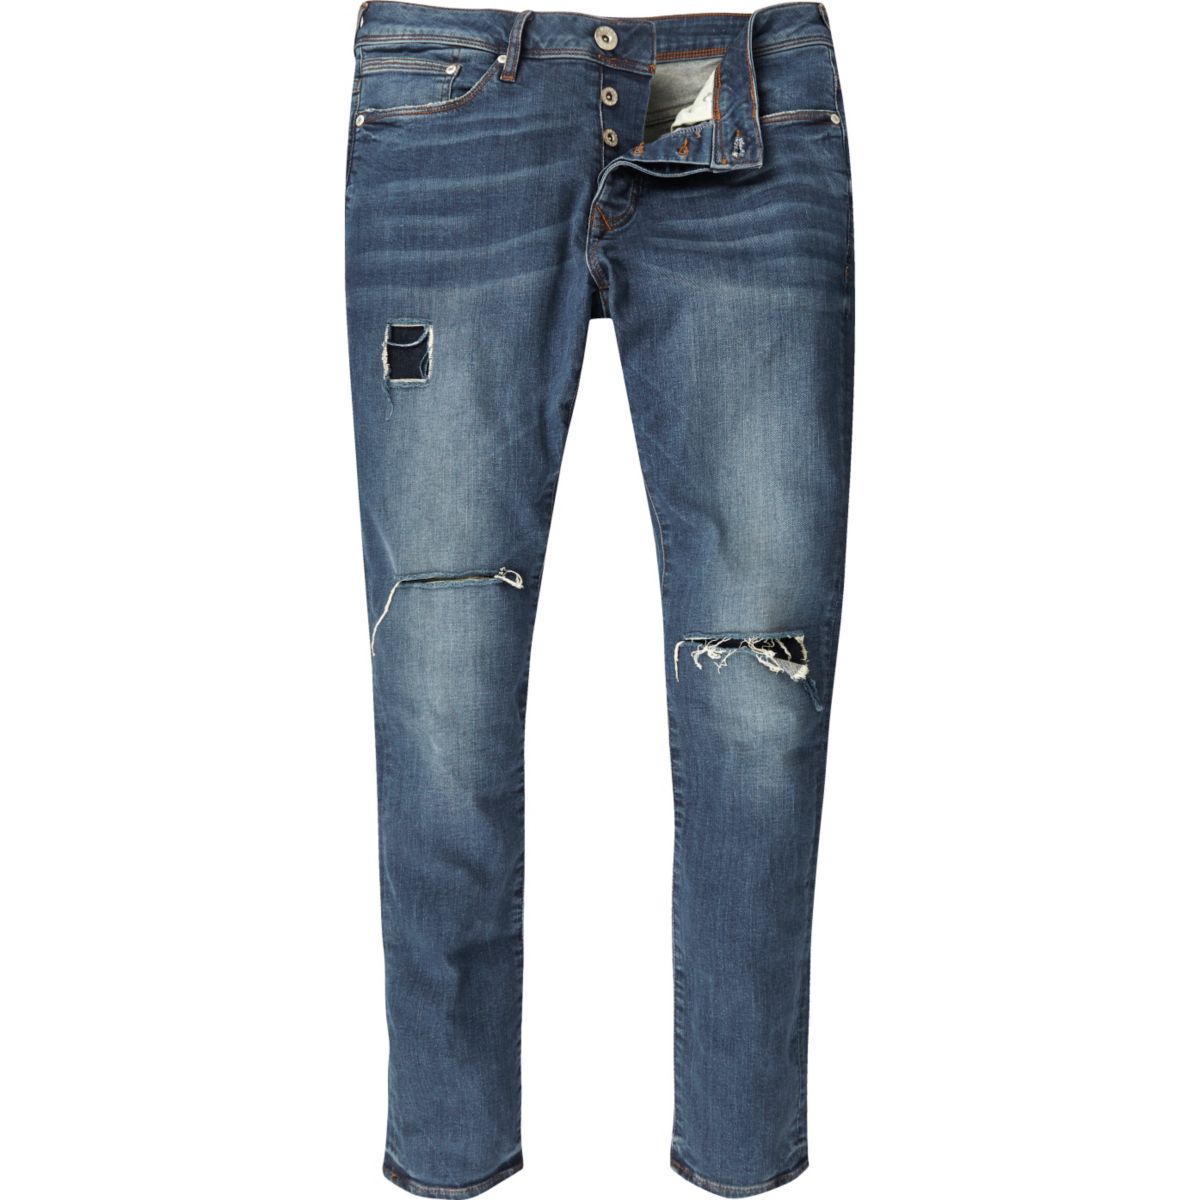 Mid wash ripped Danny super skinny jeans - Jeans - Sale - men